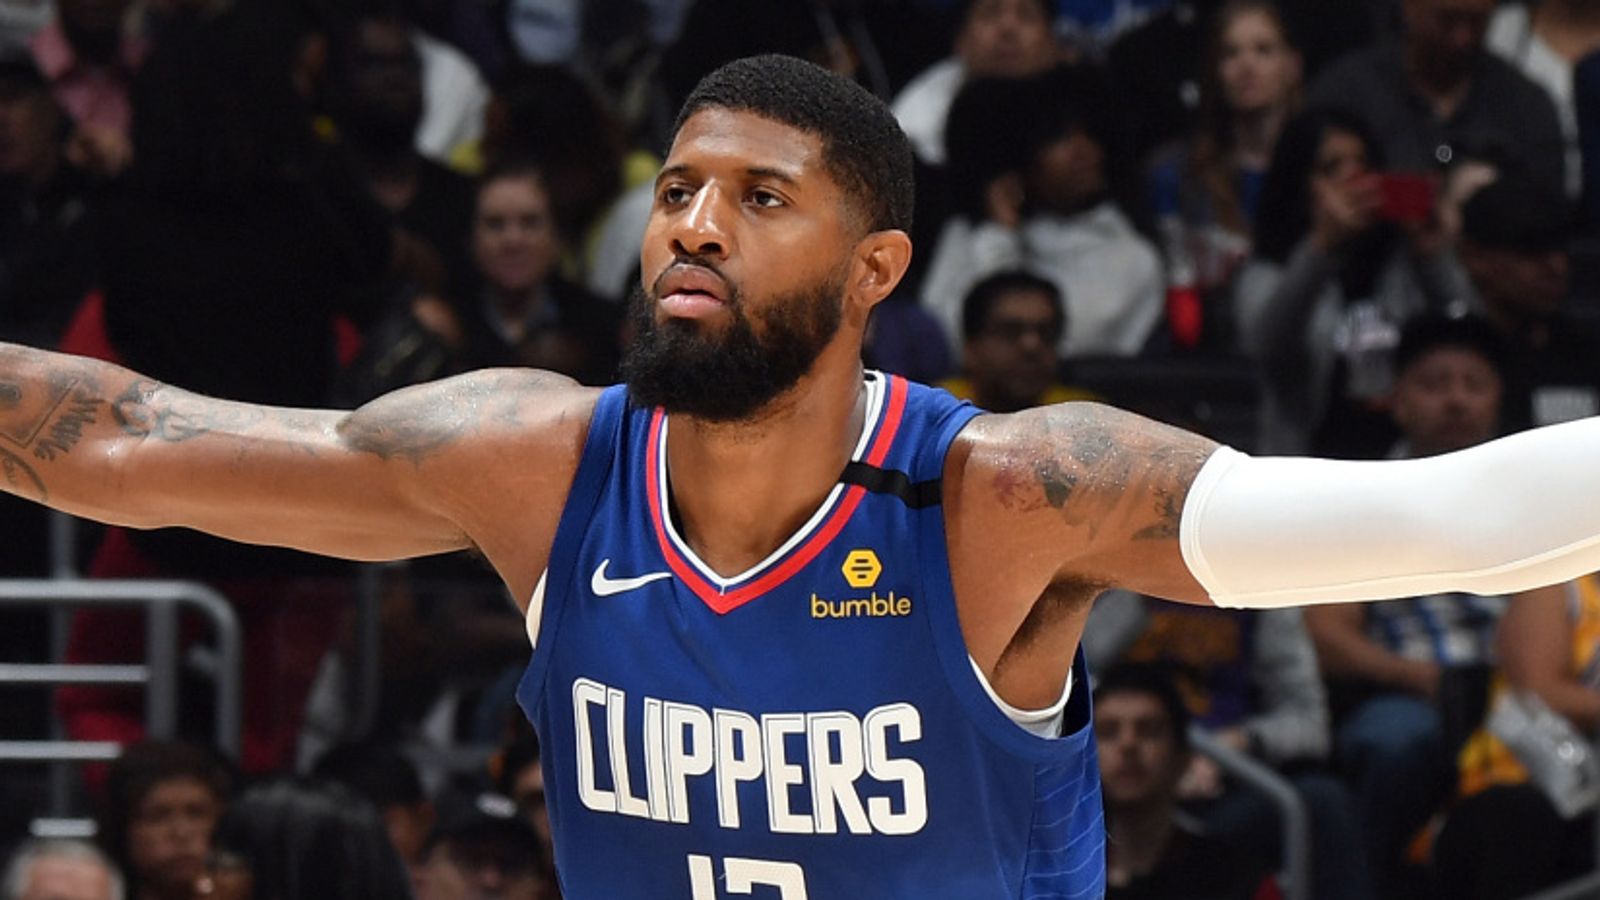 Paul George says the Clippers Want to be the Team that's in the